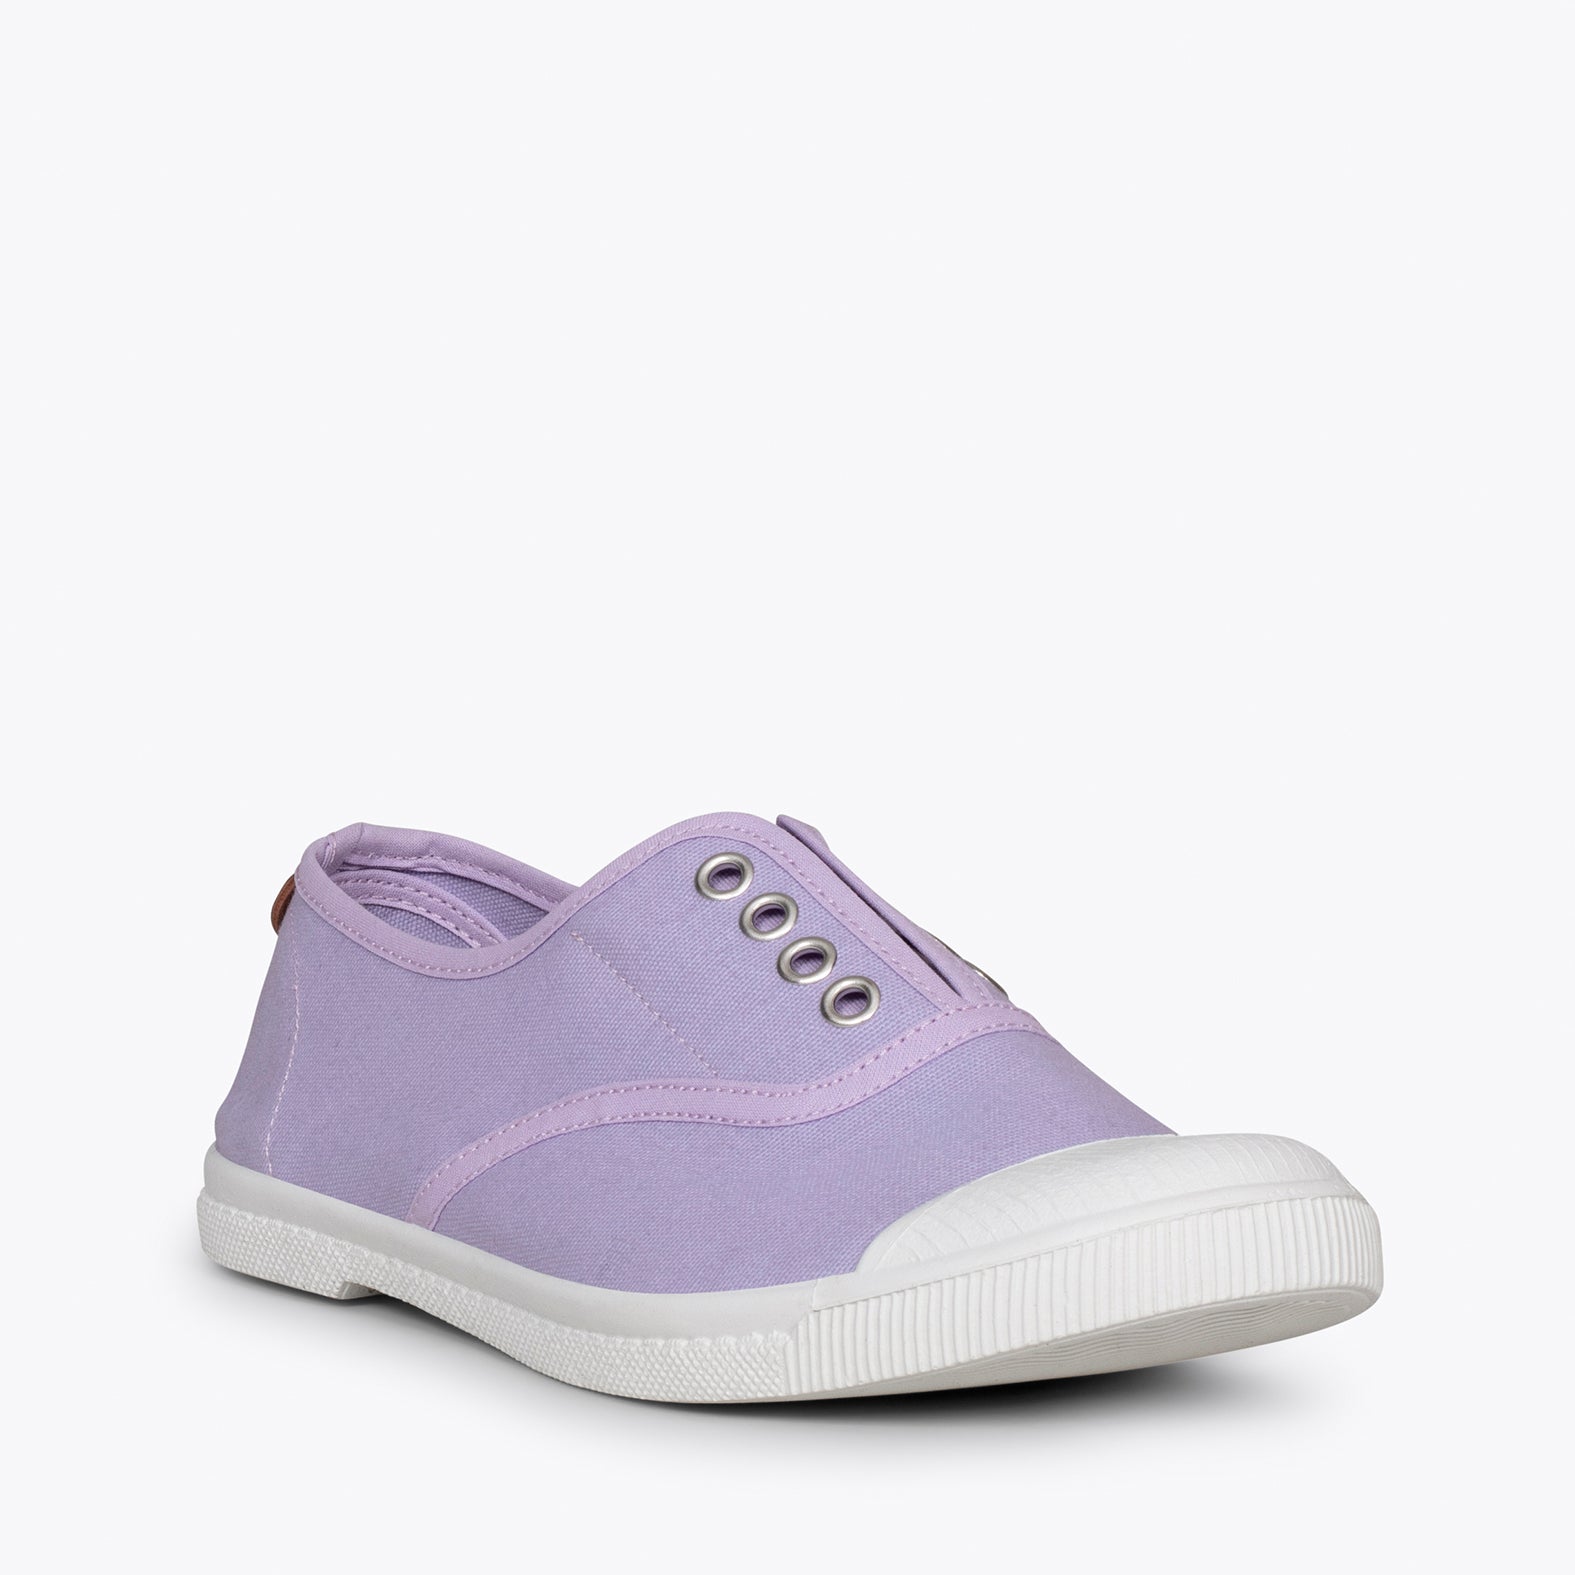 WAY – LAVENDER sneakers with elastic